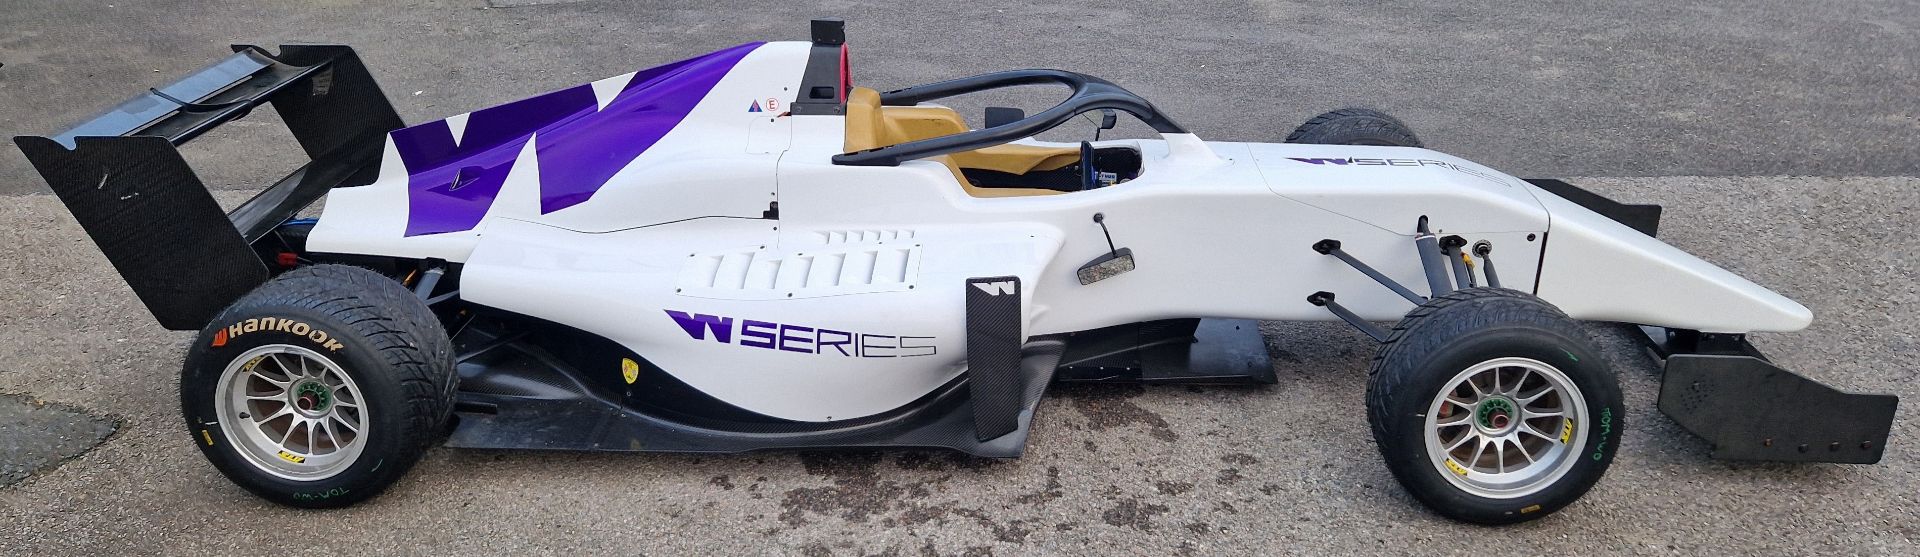 One TATUUS F3 T-318 Alfa Romeo Race Car Chassis No. 034 (2019) Finished in W Series Spare Car Livery - Image 2 of 7